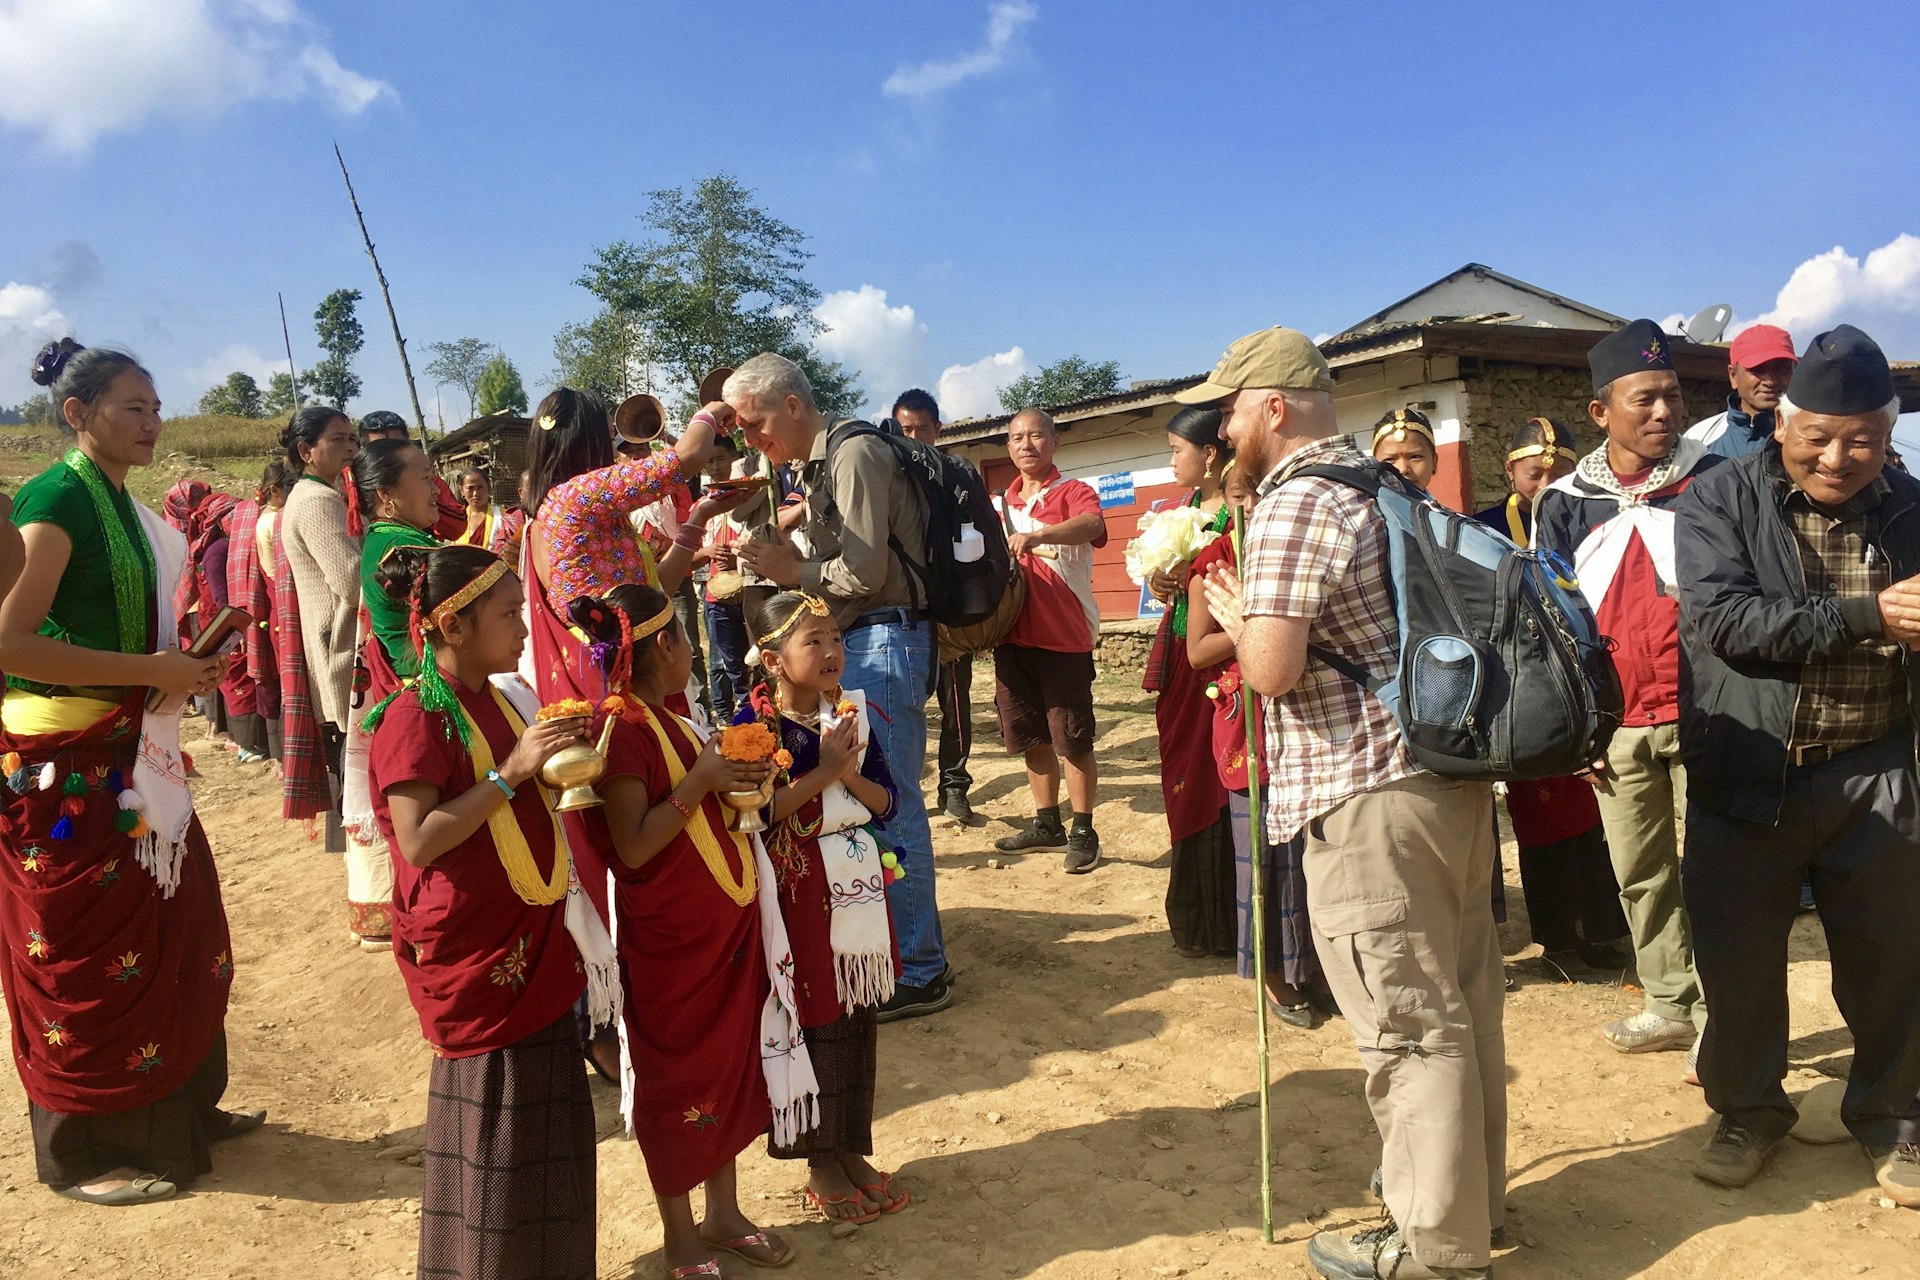 Tourists meeting villagers in a rural community in Nepal